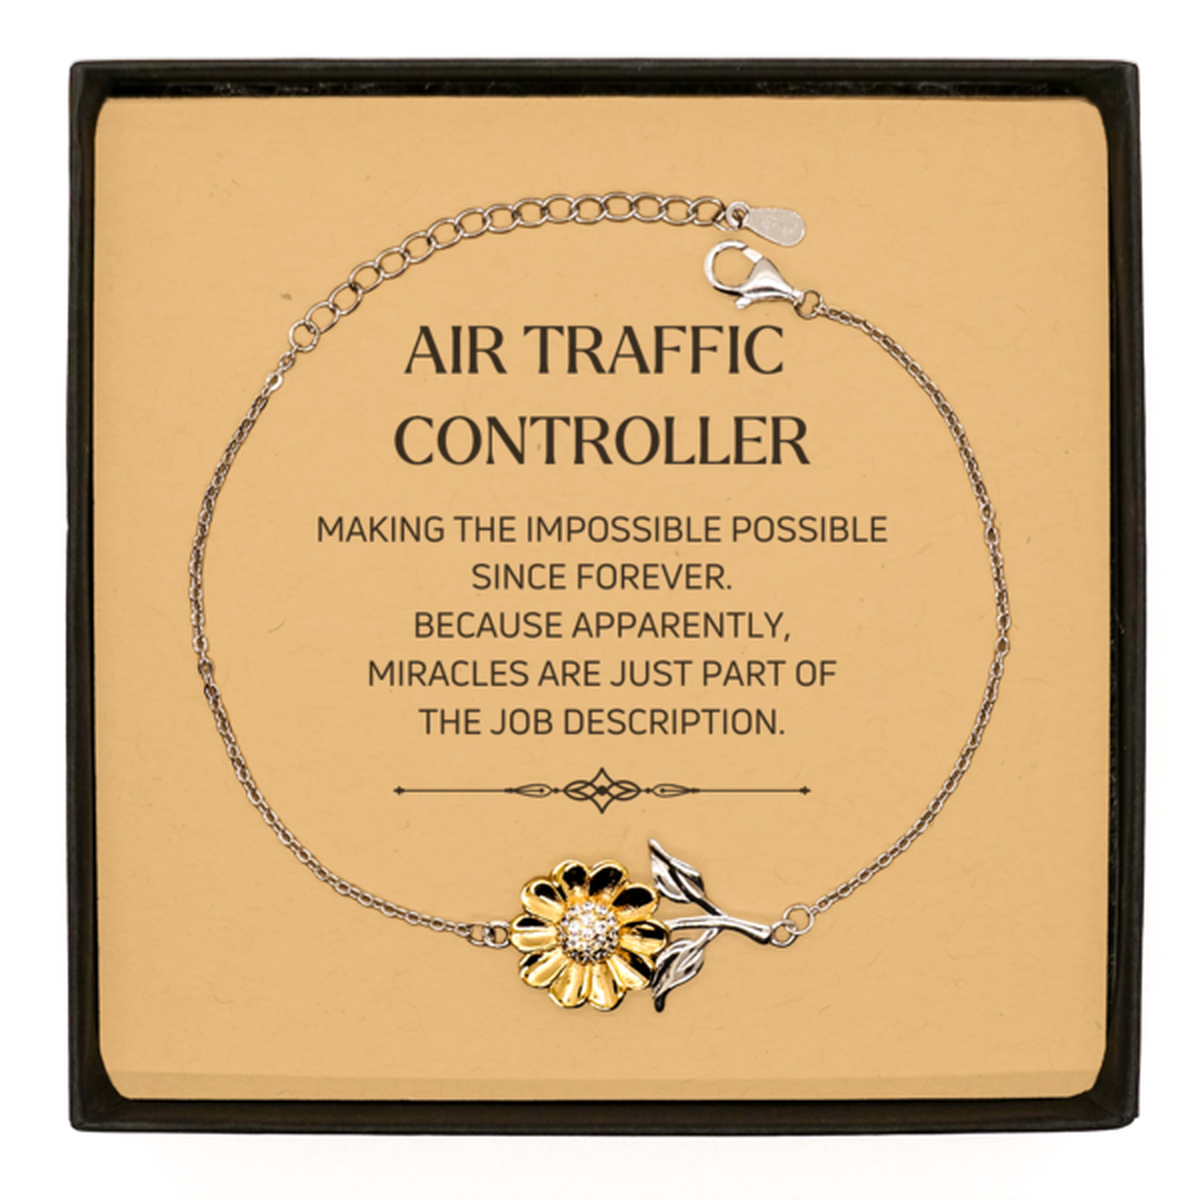 Funny Air Traffic Controller Gifts, Miracles are just part of the job description, Inspirational Birthday Sunflower Bracelet For Air Traffic Controller, Men, Women, Coworkers, Friends, Boss